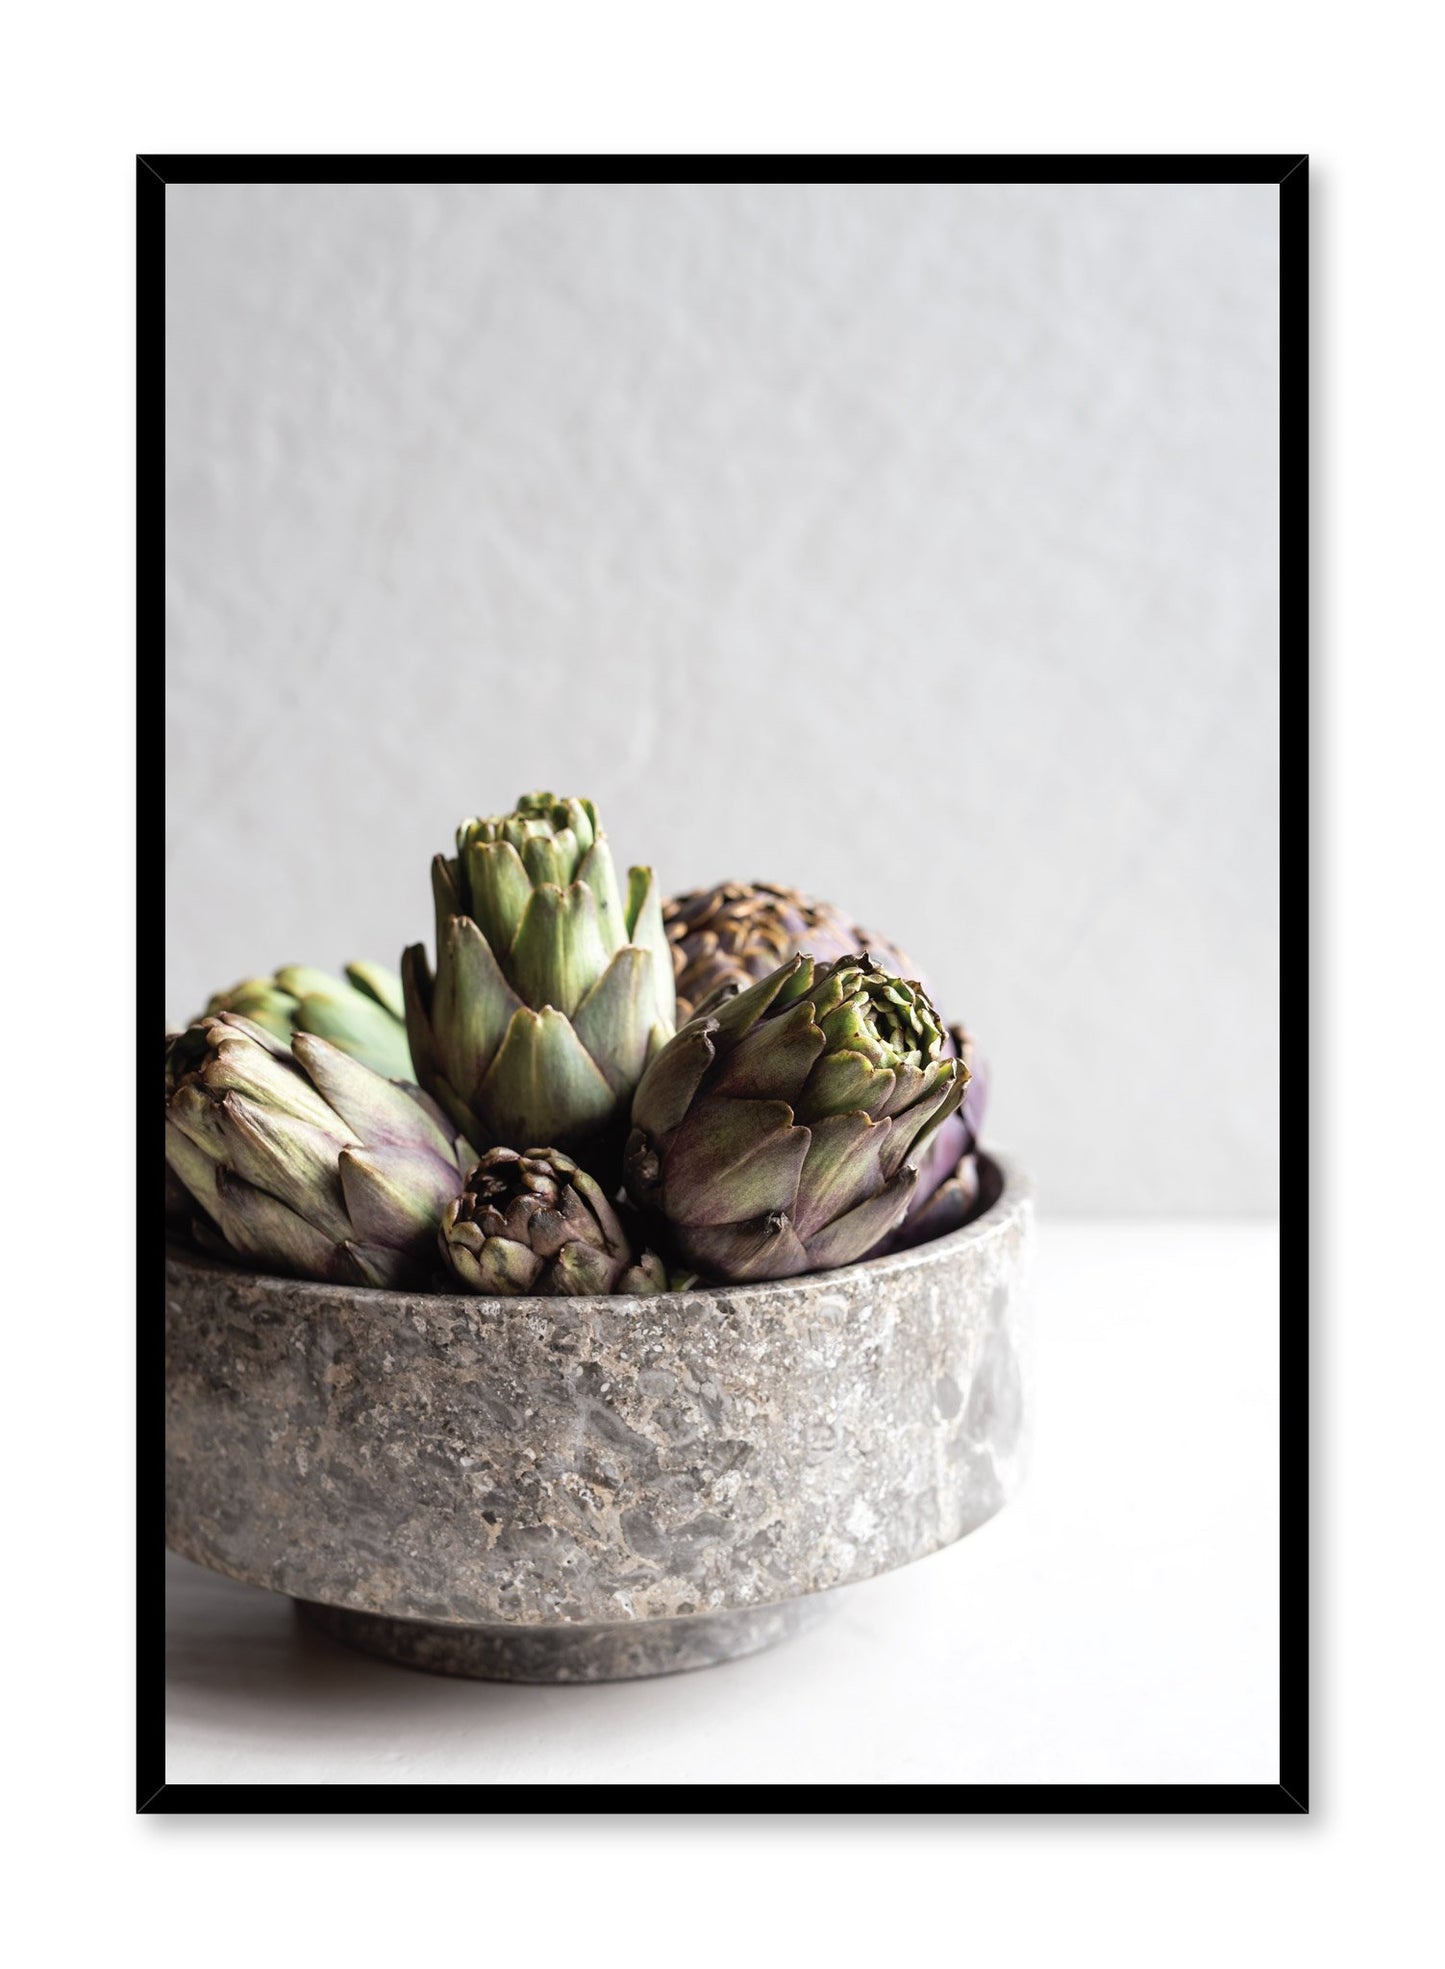 Minimalist poster by Opposite Wall with Artichoke Bowl food photography